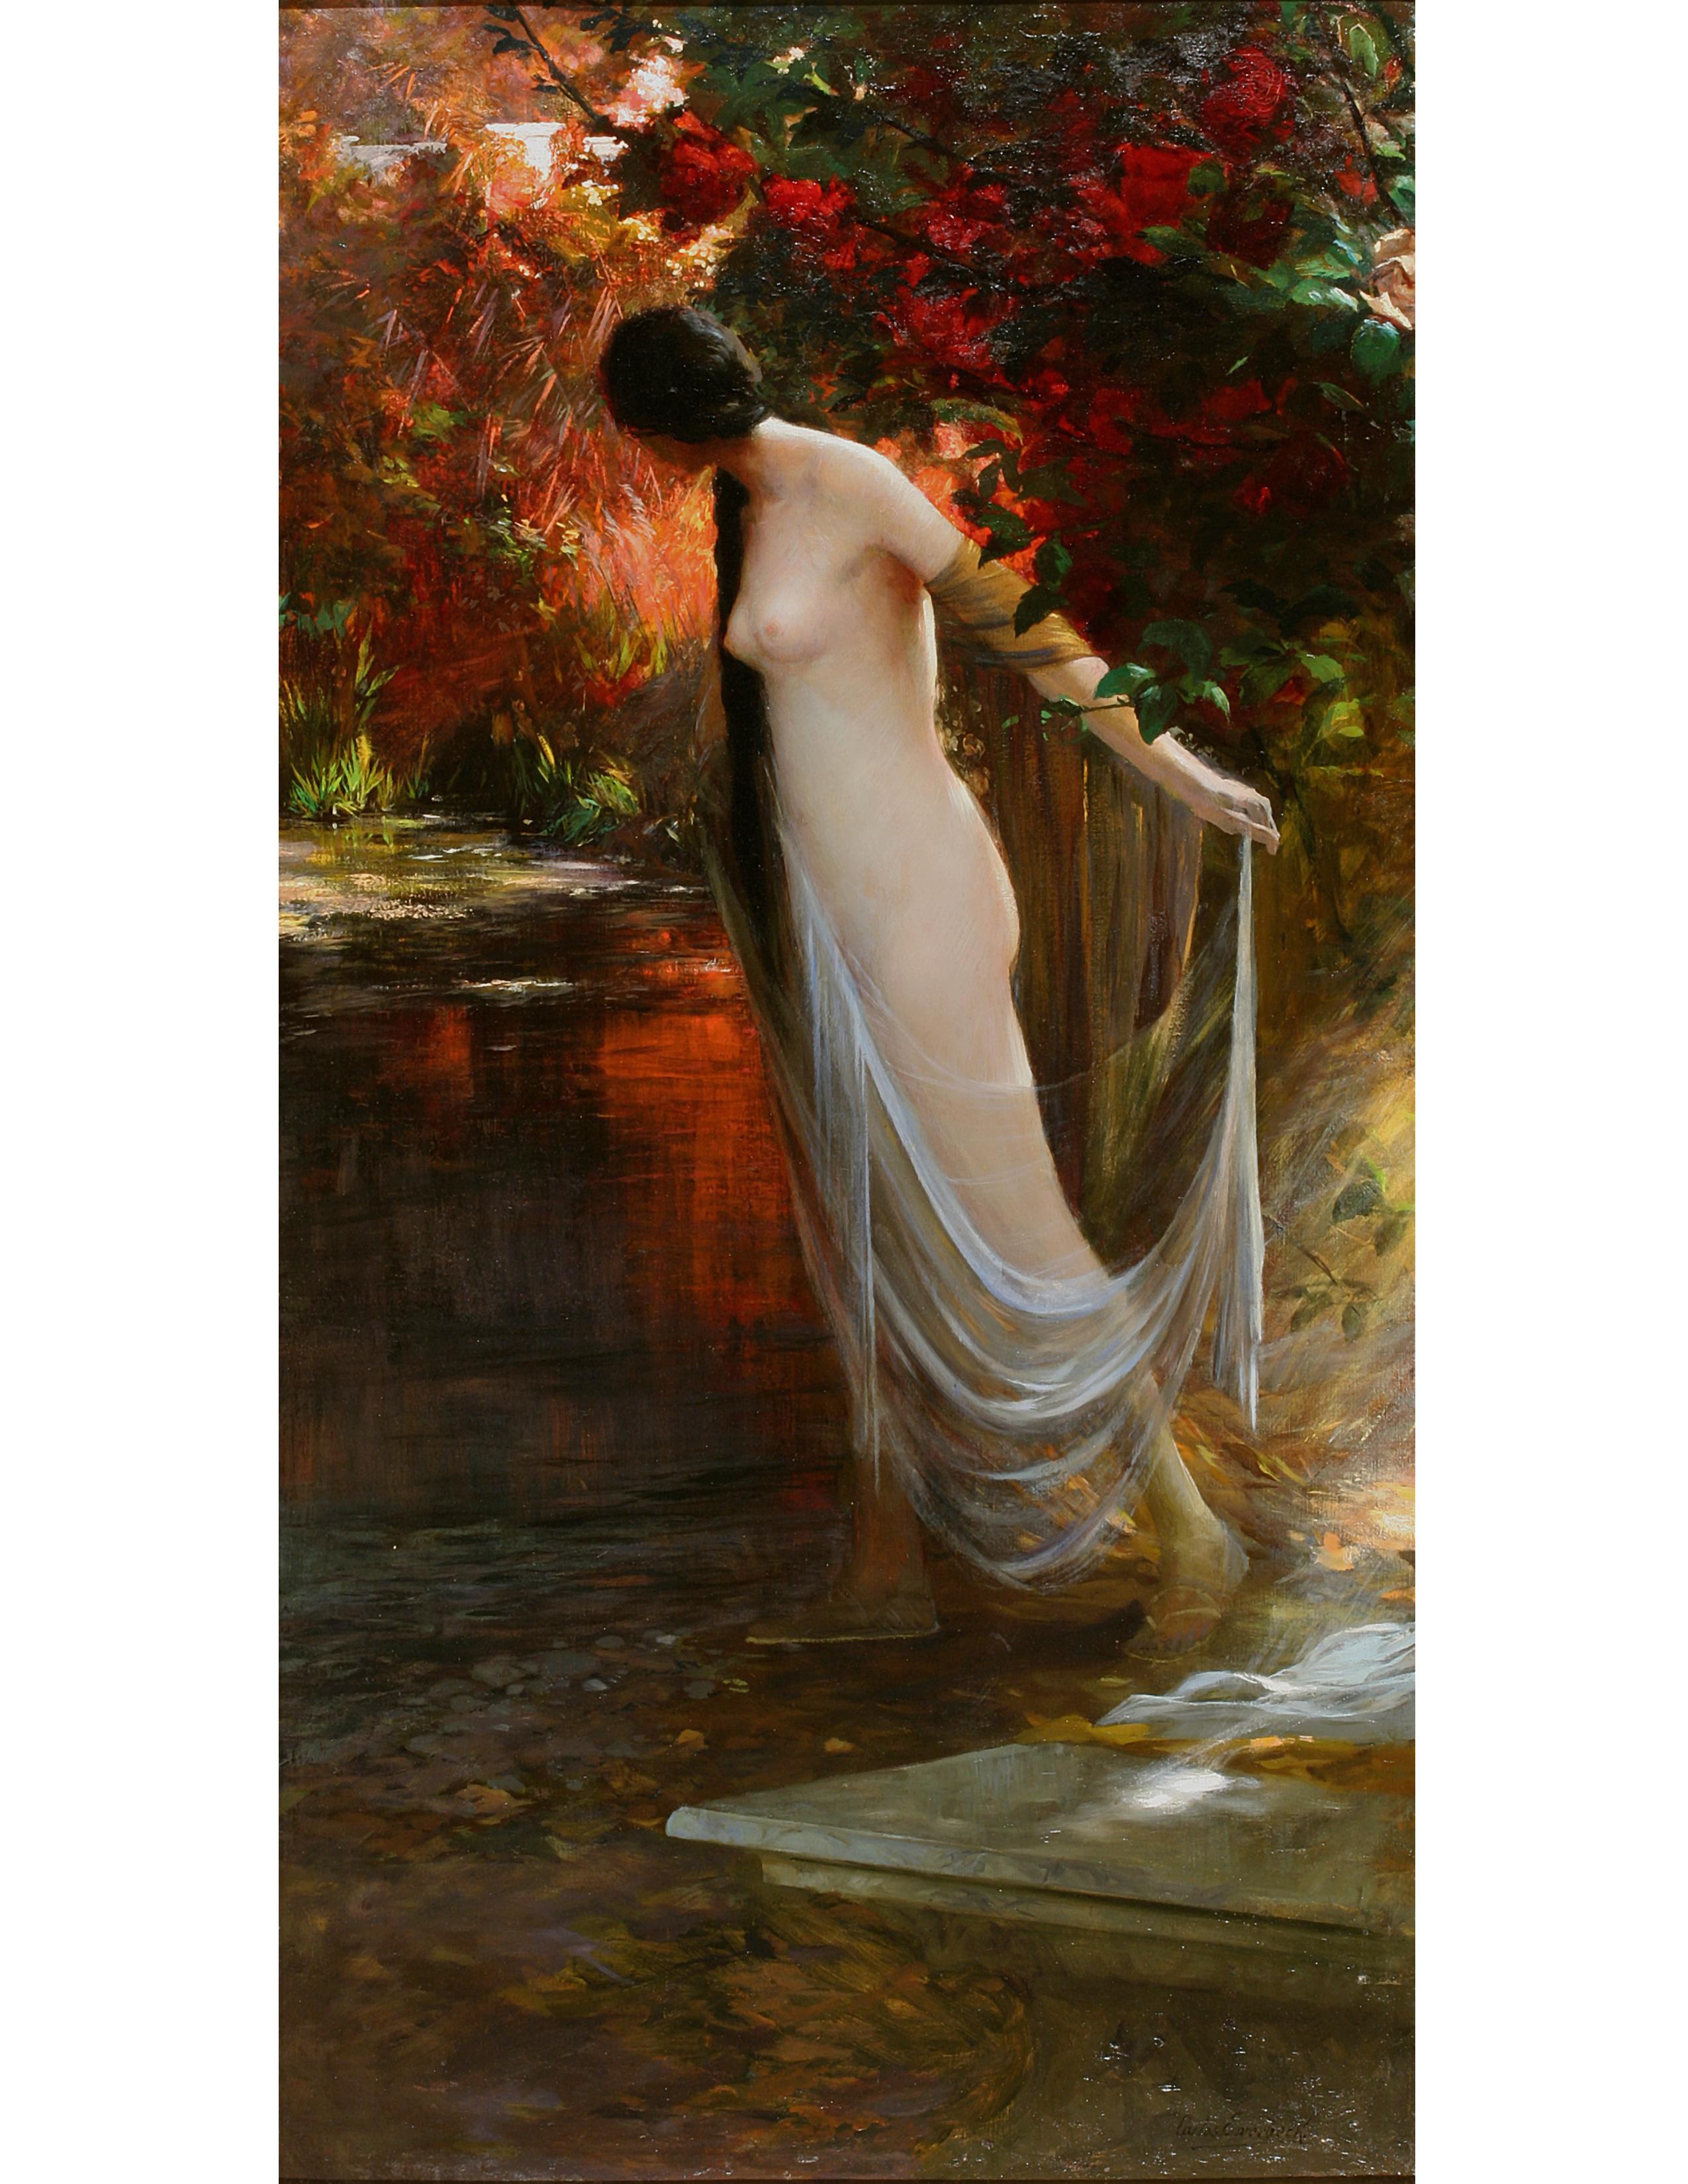 Ernst Ewerbeck Figurative Painting - Female nude, titled "Ophelia at the Water's Edge"